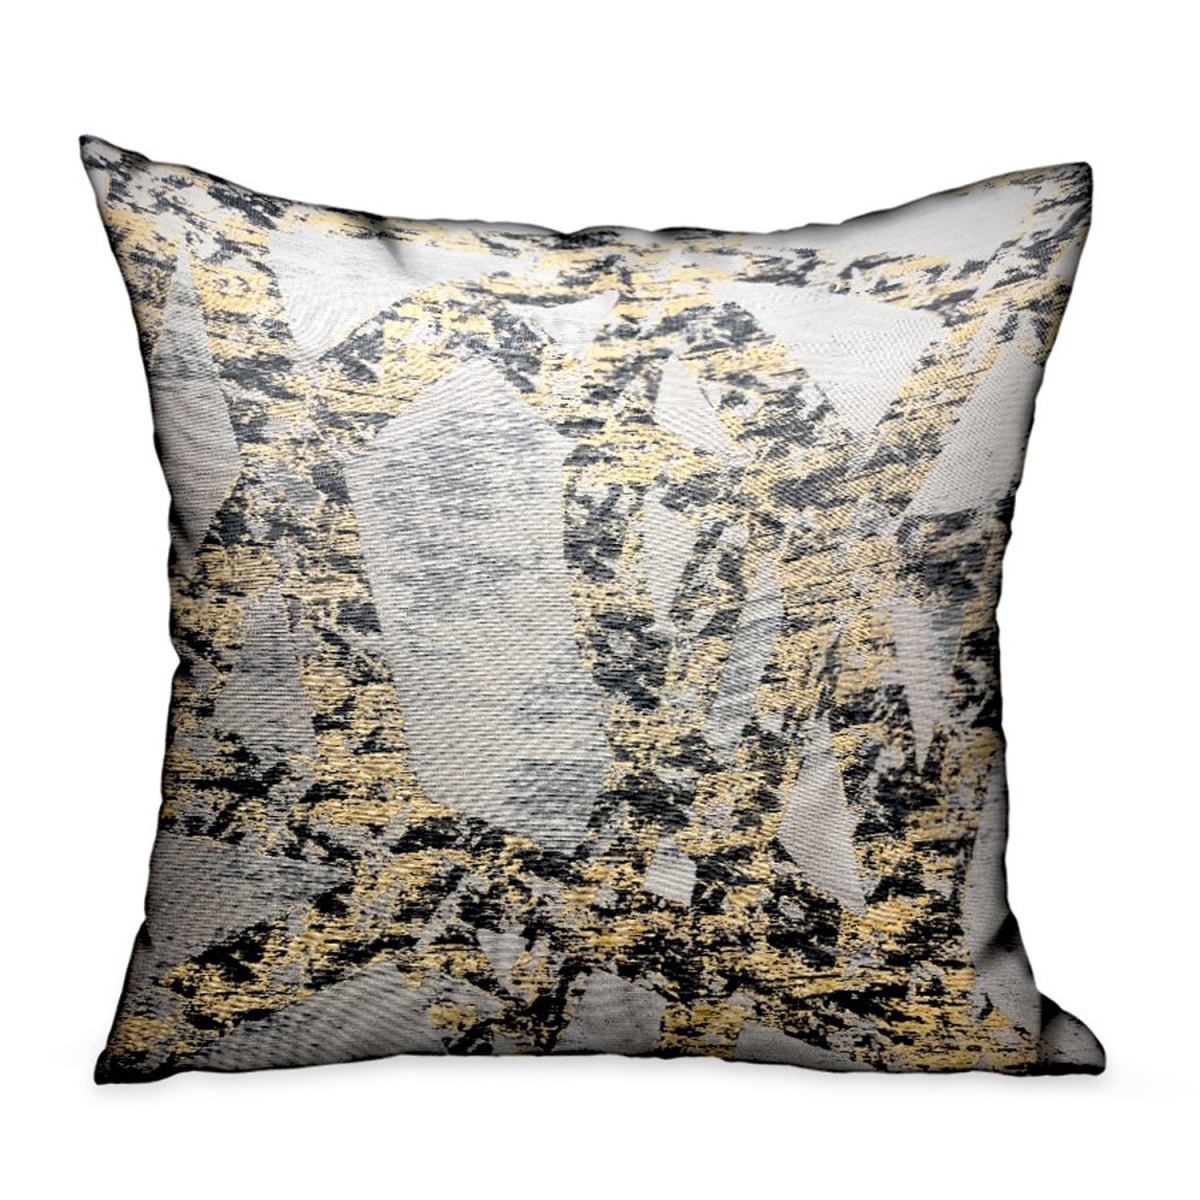 Plutus Brands PBRA2338-2626-DP 26 x 26 in. Craven Dust Gold & Gray Abstract Luxury Throw Pillow